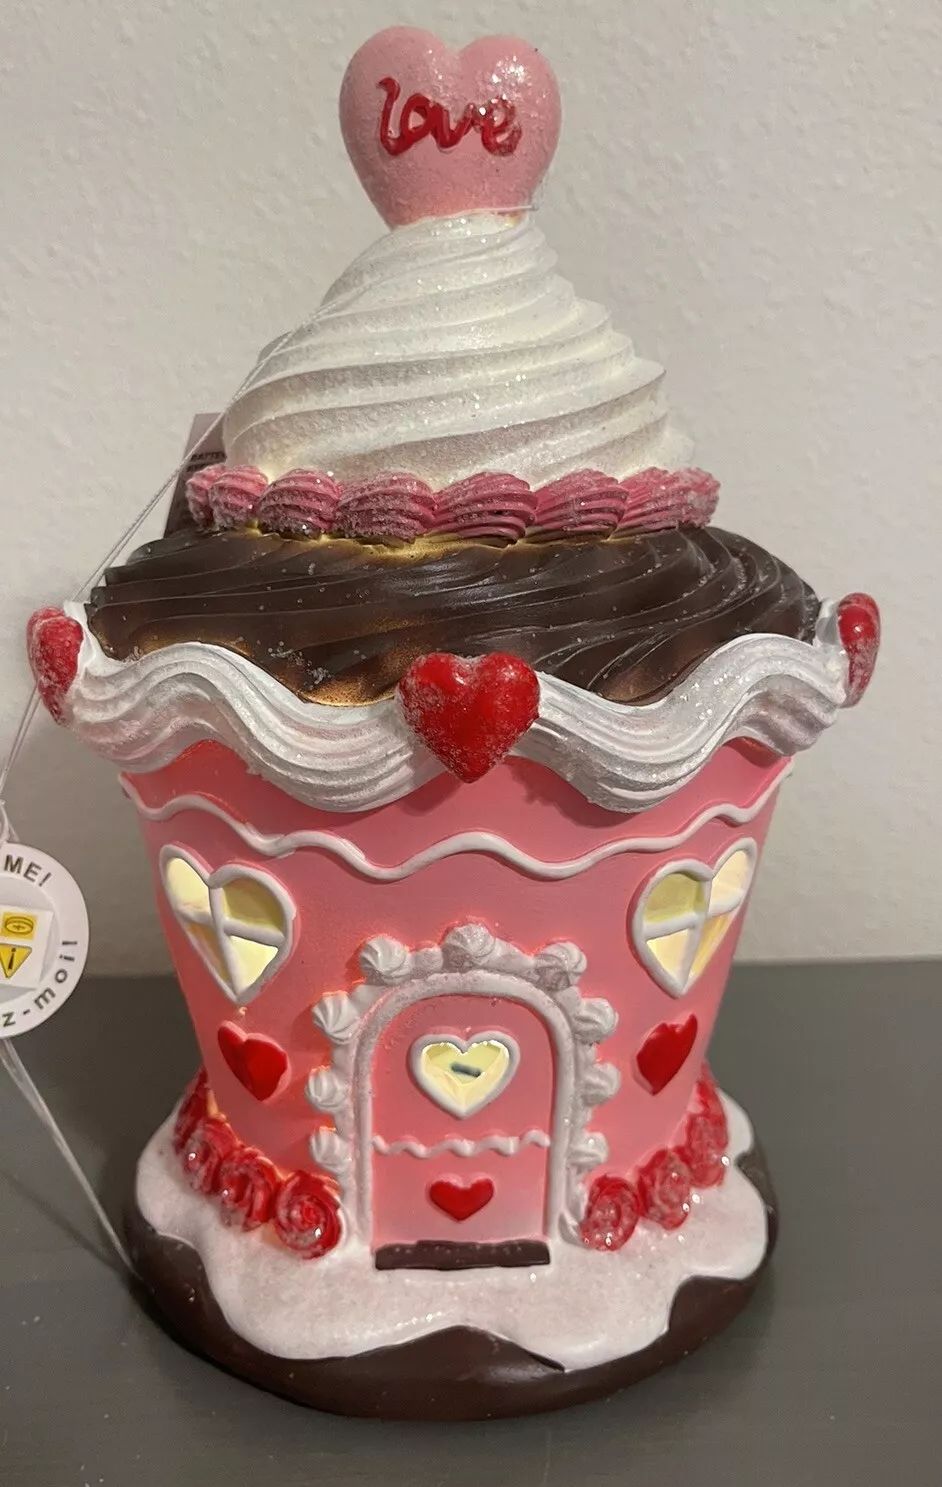 Love Cupcake Valentine's Day Light Up Sugared Cupcake Gingerbread House New | eBay US